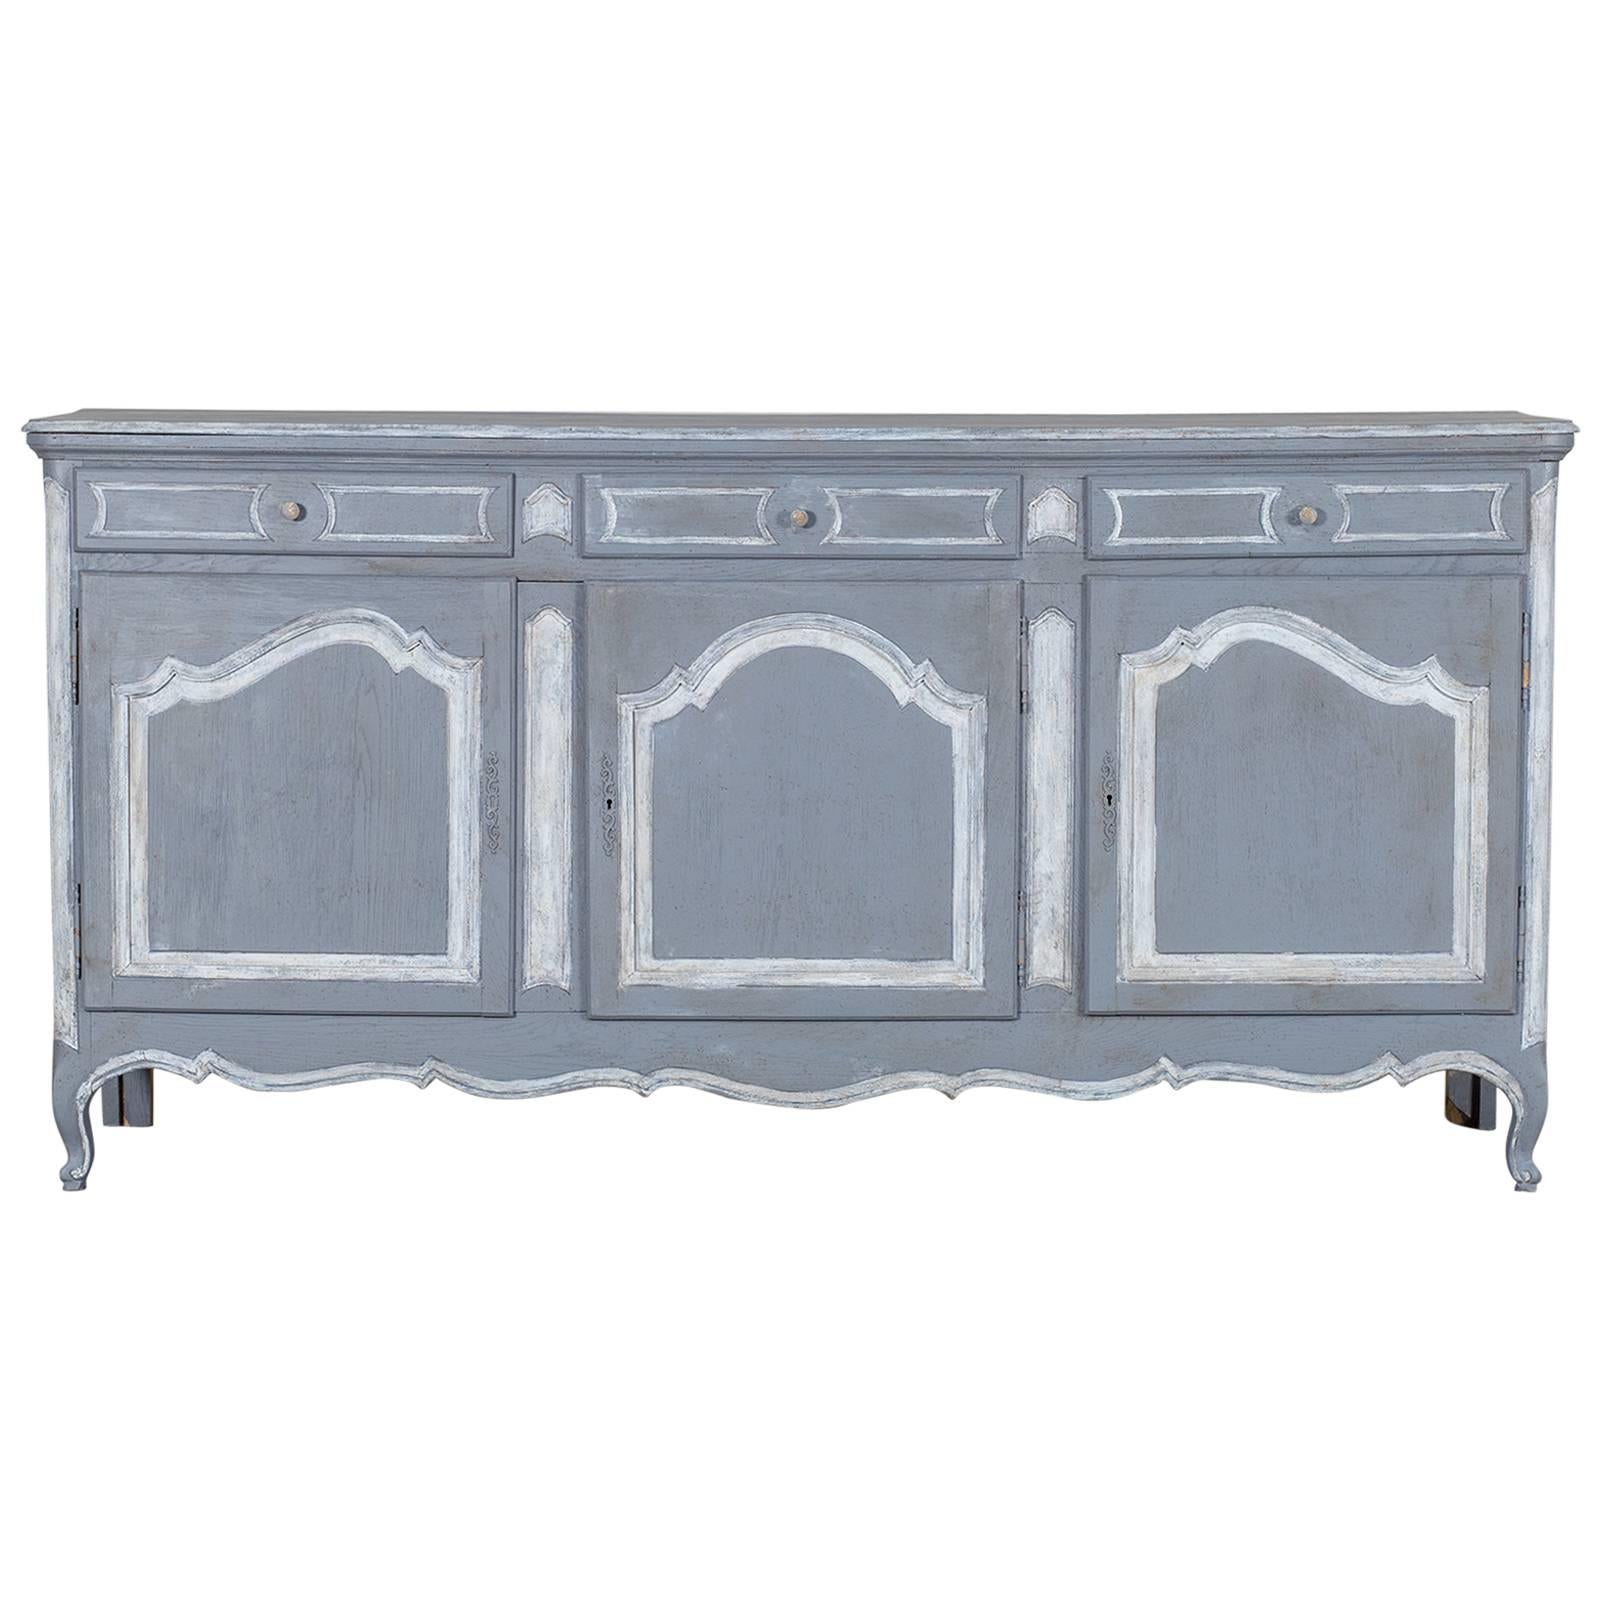 Antique French Louis XV Style Painted Oak Buffet, circa 1875